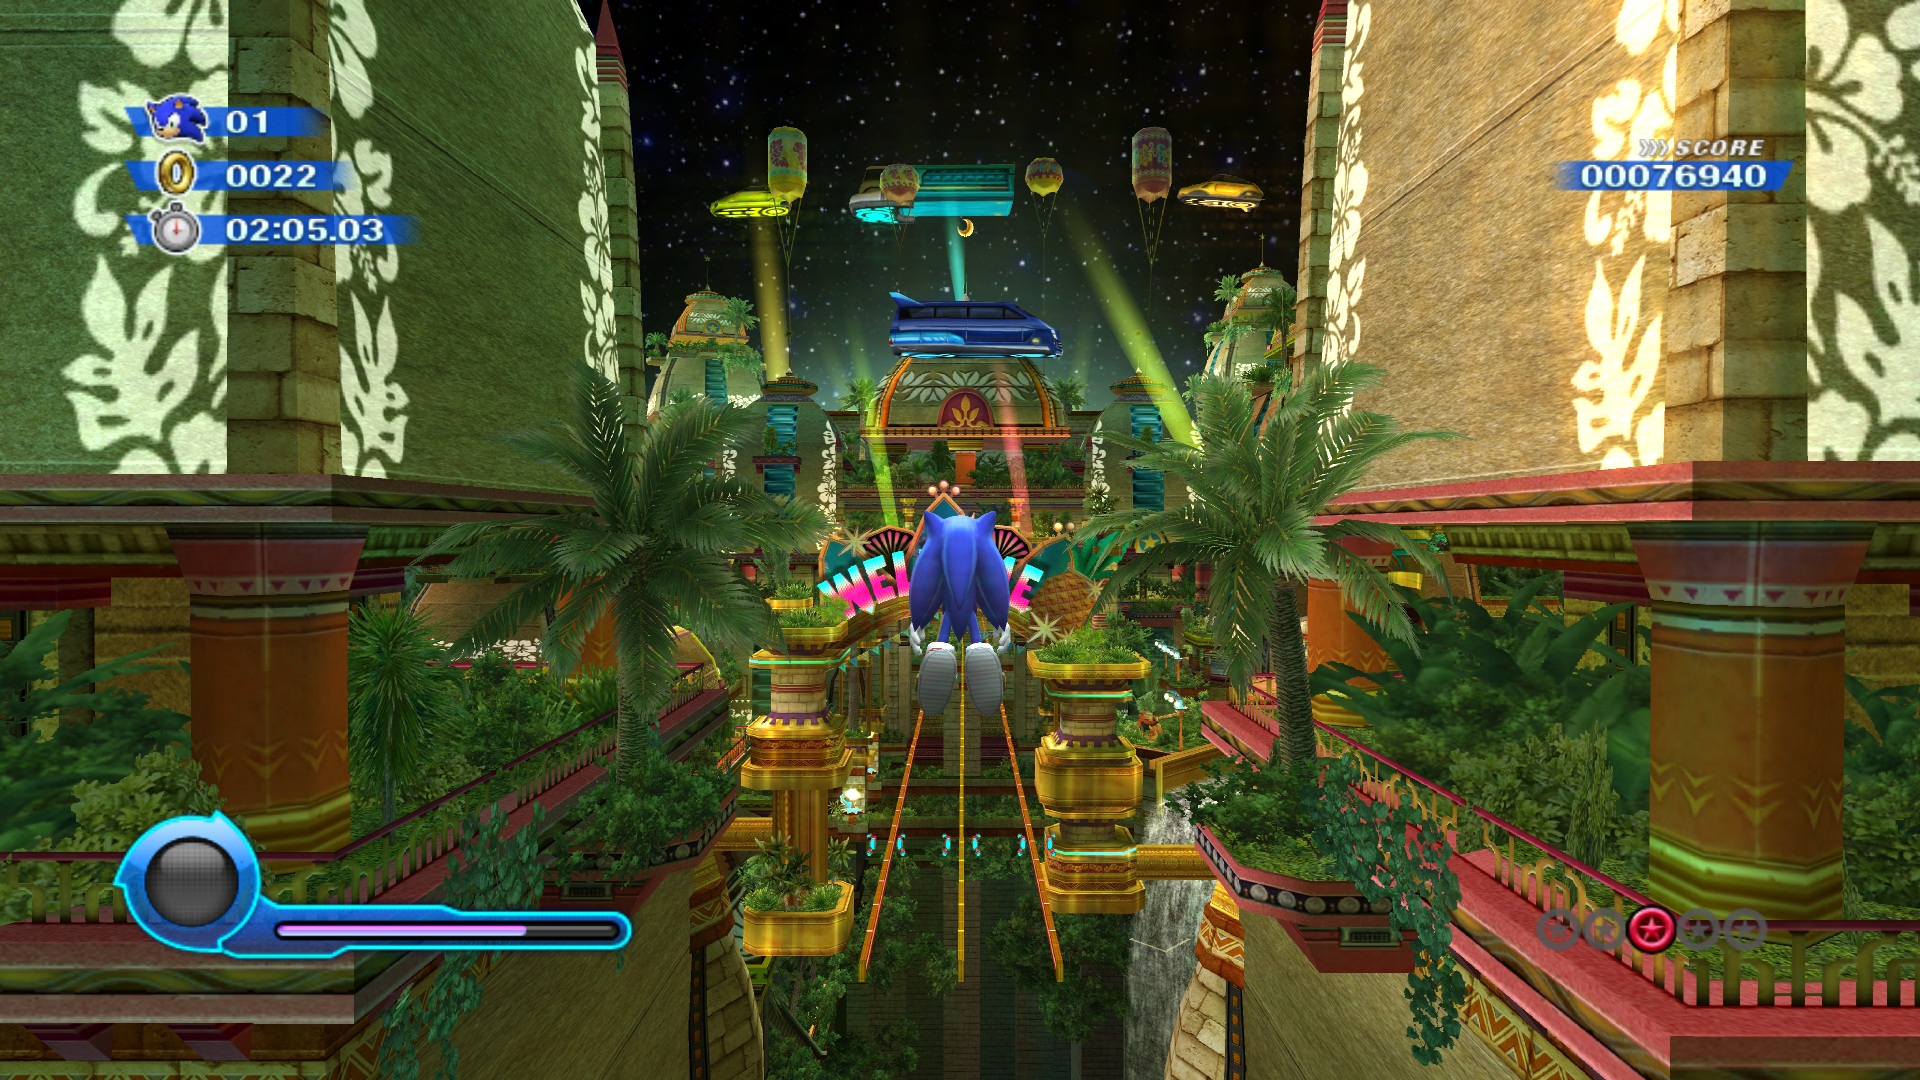 Sonic Colors ROM, WII Game